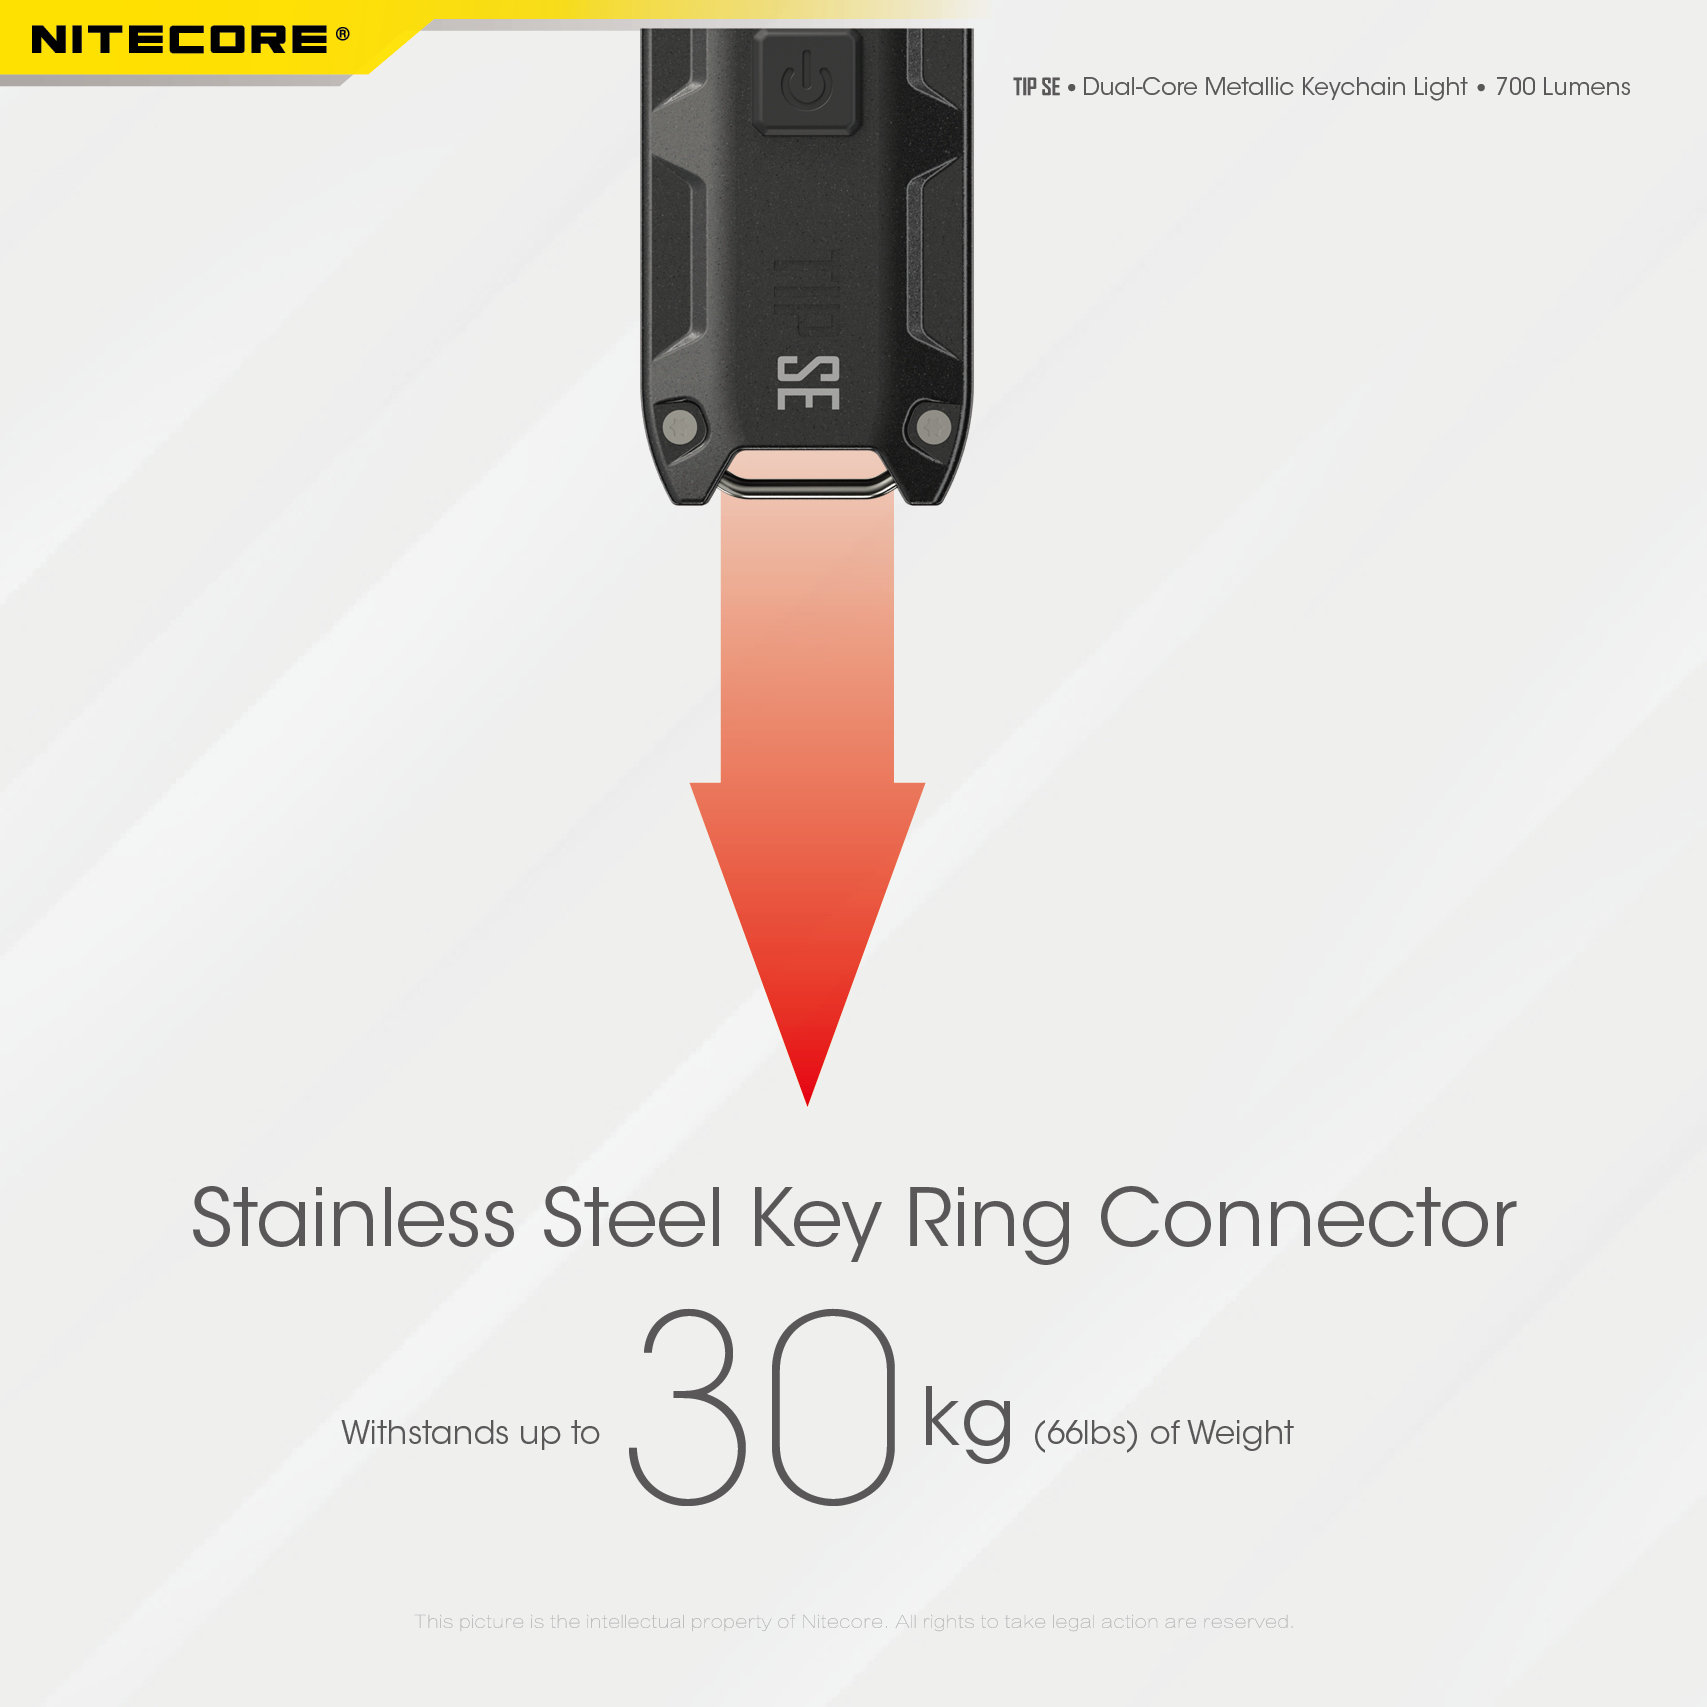 NITECORE-TIP-SE-700LM-P8-Dual-Light-LED-Keychain-Flashlight-Type-C-Rechargeable-QC-Every-Day-Carry-M-1976045-18